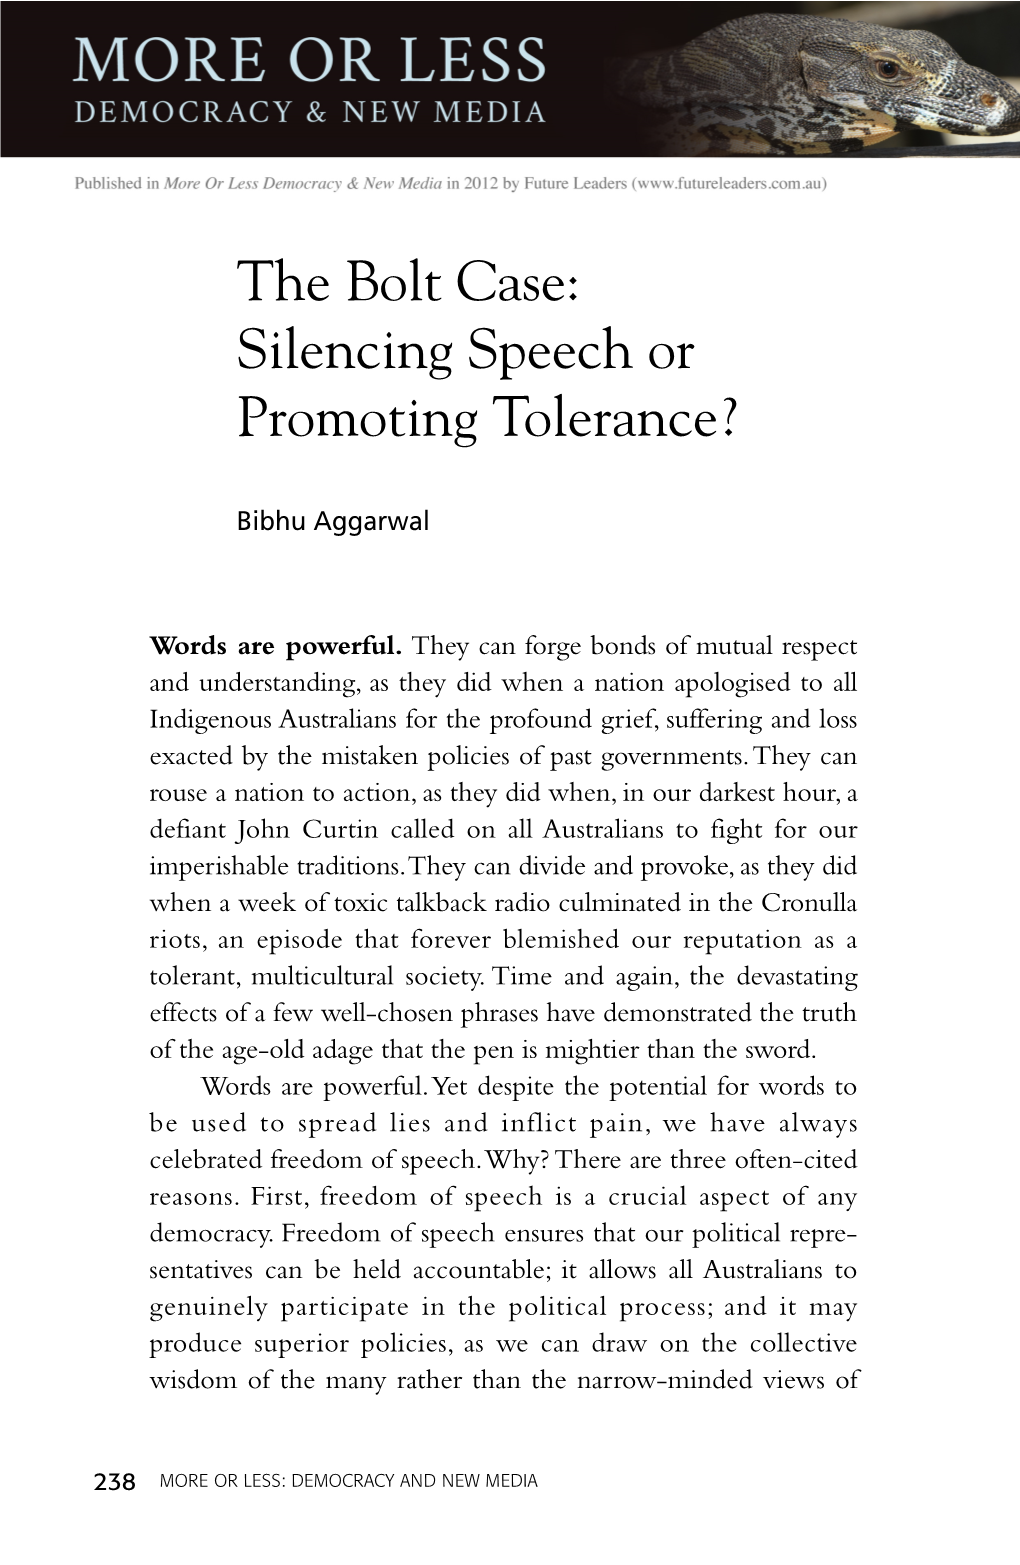 The Bolt Case: Silencing Speech Or Promoting Tolerance?